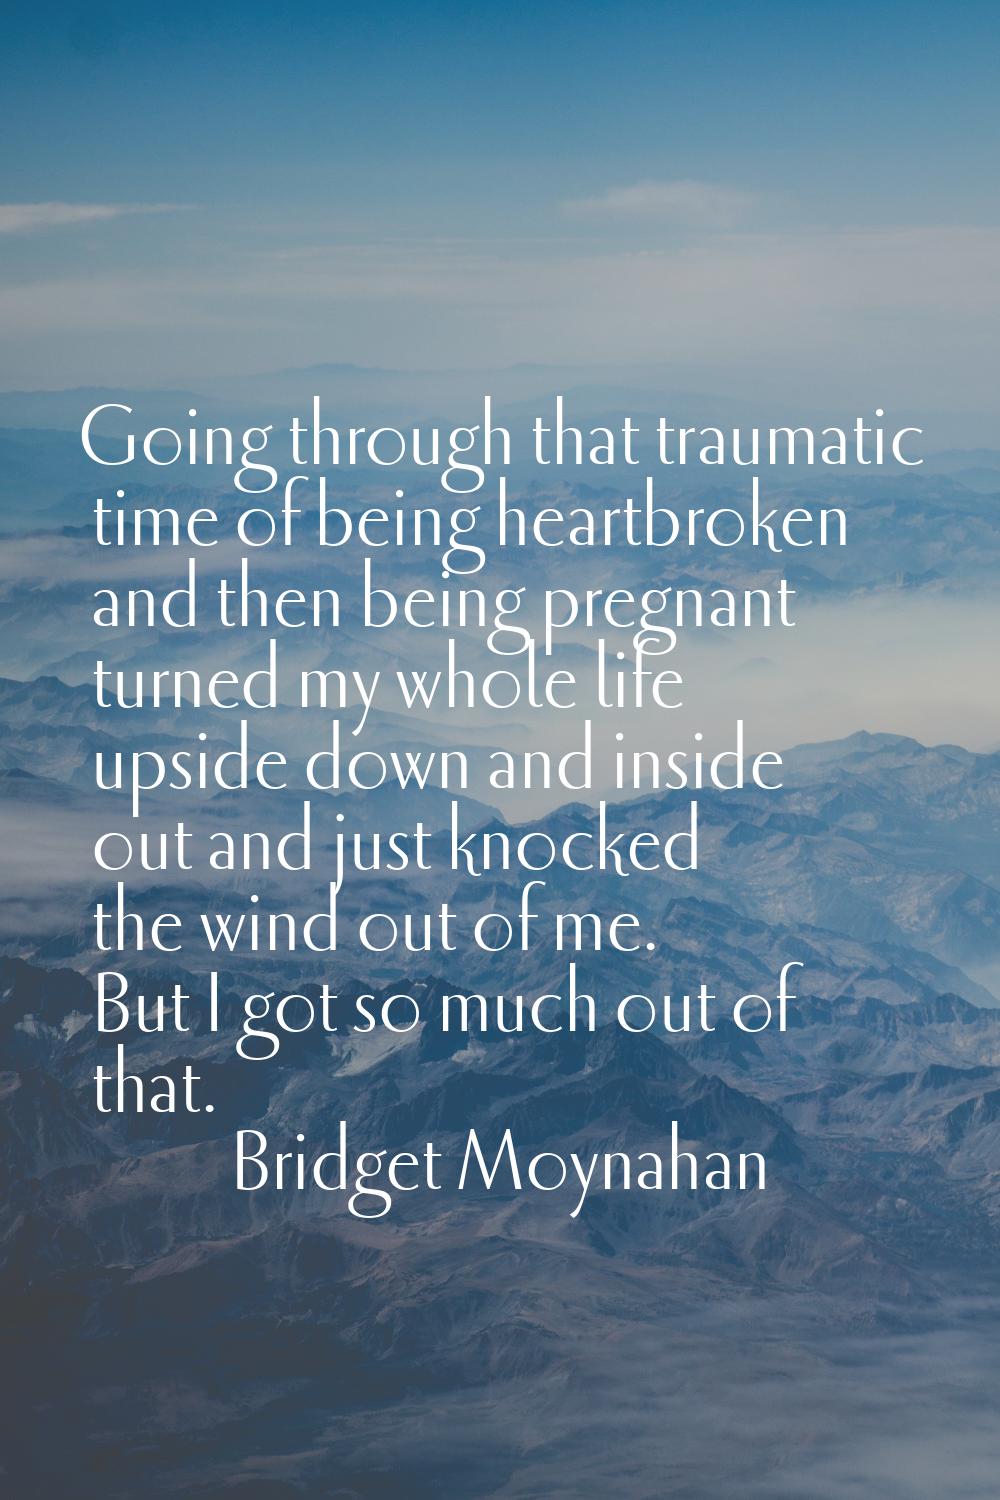 Going through that traumatic time of being heartbroken and then being pregnant turned my whole life